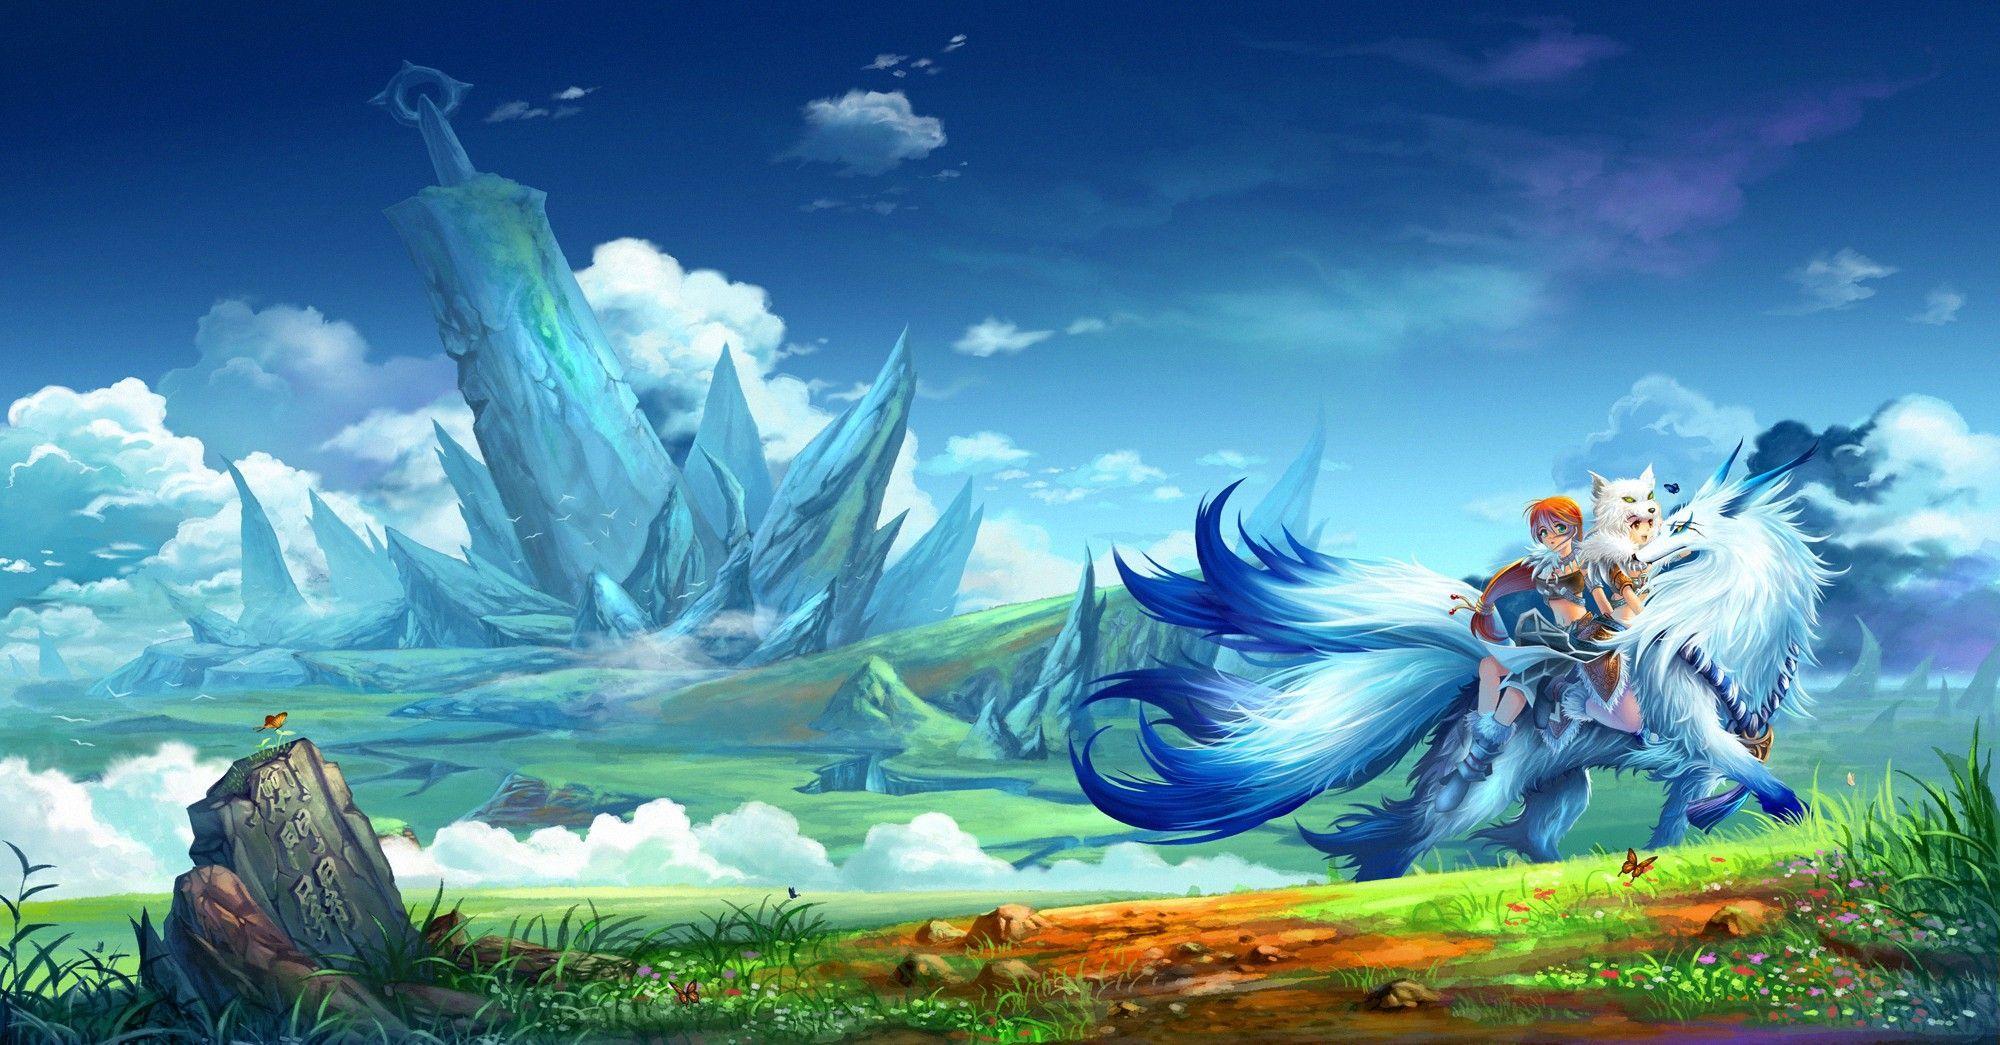 HD Anime Fantasy Wallpapers - Wallpaper Cave